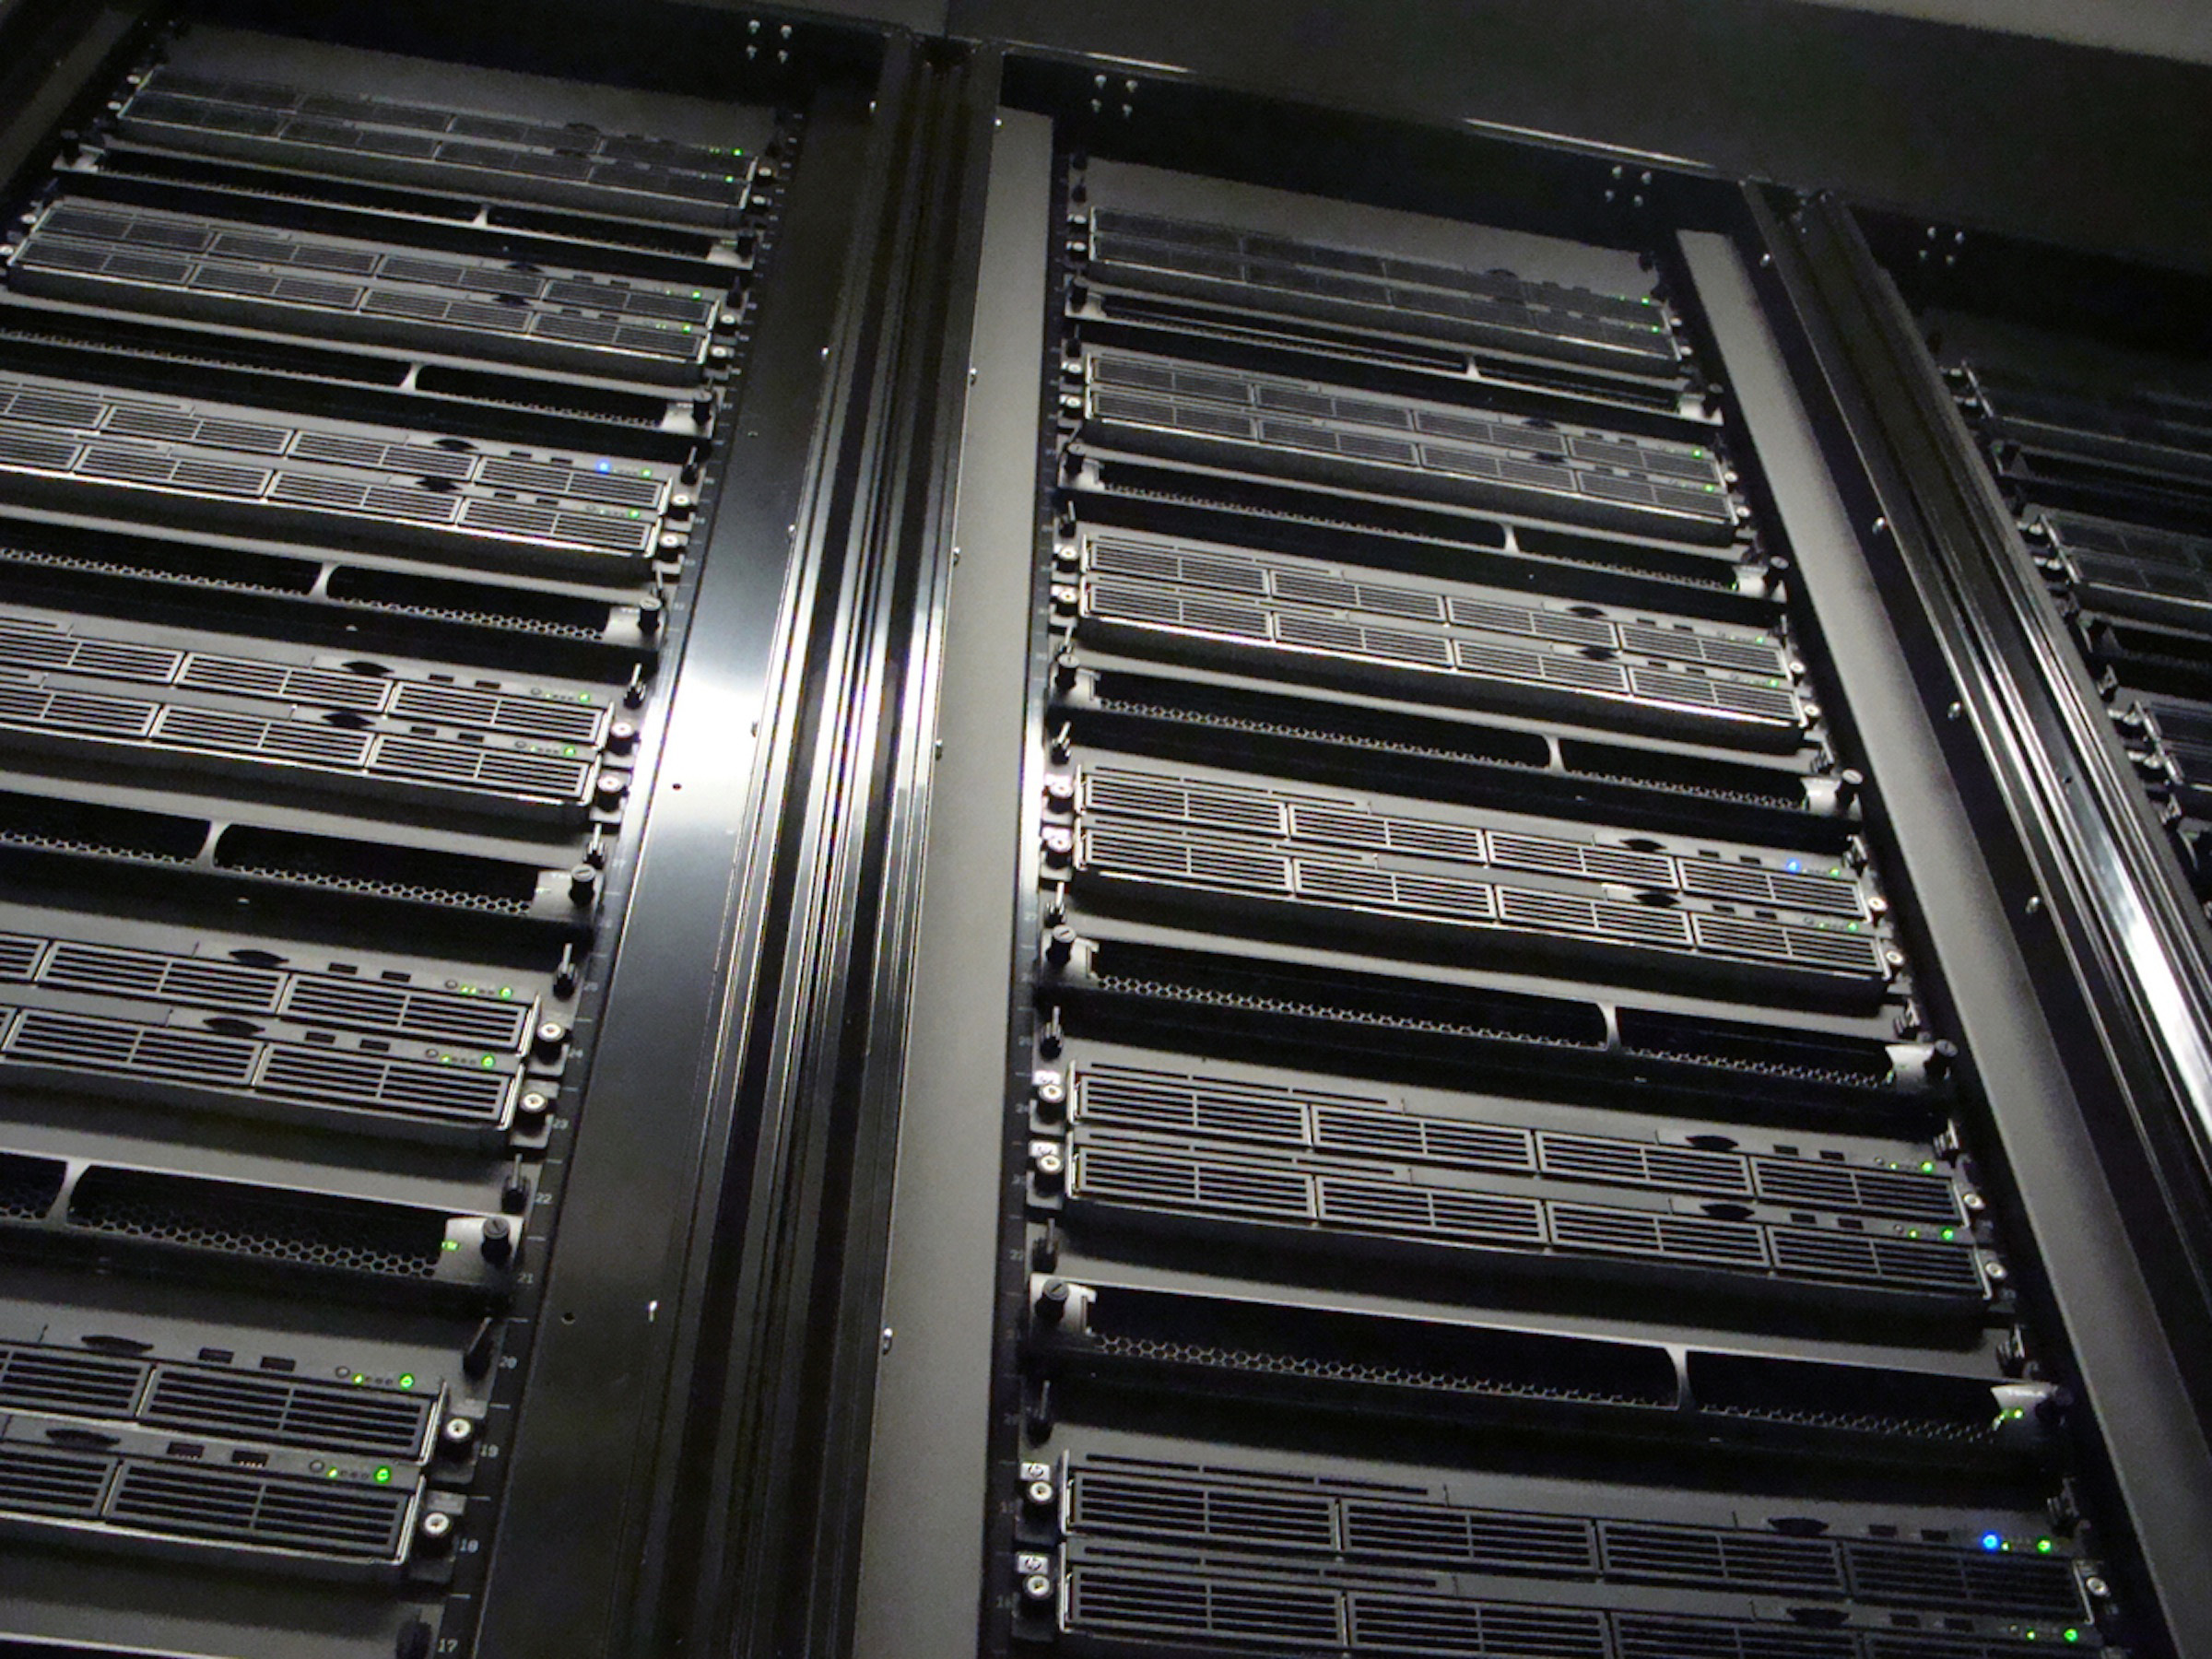 Engineers need to understand how to balance power and temperature regulation when operating or managing large-scale data-storage facilities with highly concentrated computing infrastructure, such as the University of Utah's NVIDIA CUDA computing cluster (shown here). The university’s new certificate program in data center engineering will prepare students to work for companies and government organizations with large data centers that handle and store massive amounts of data.